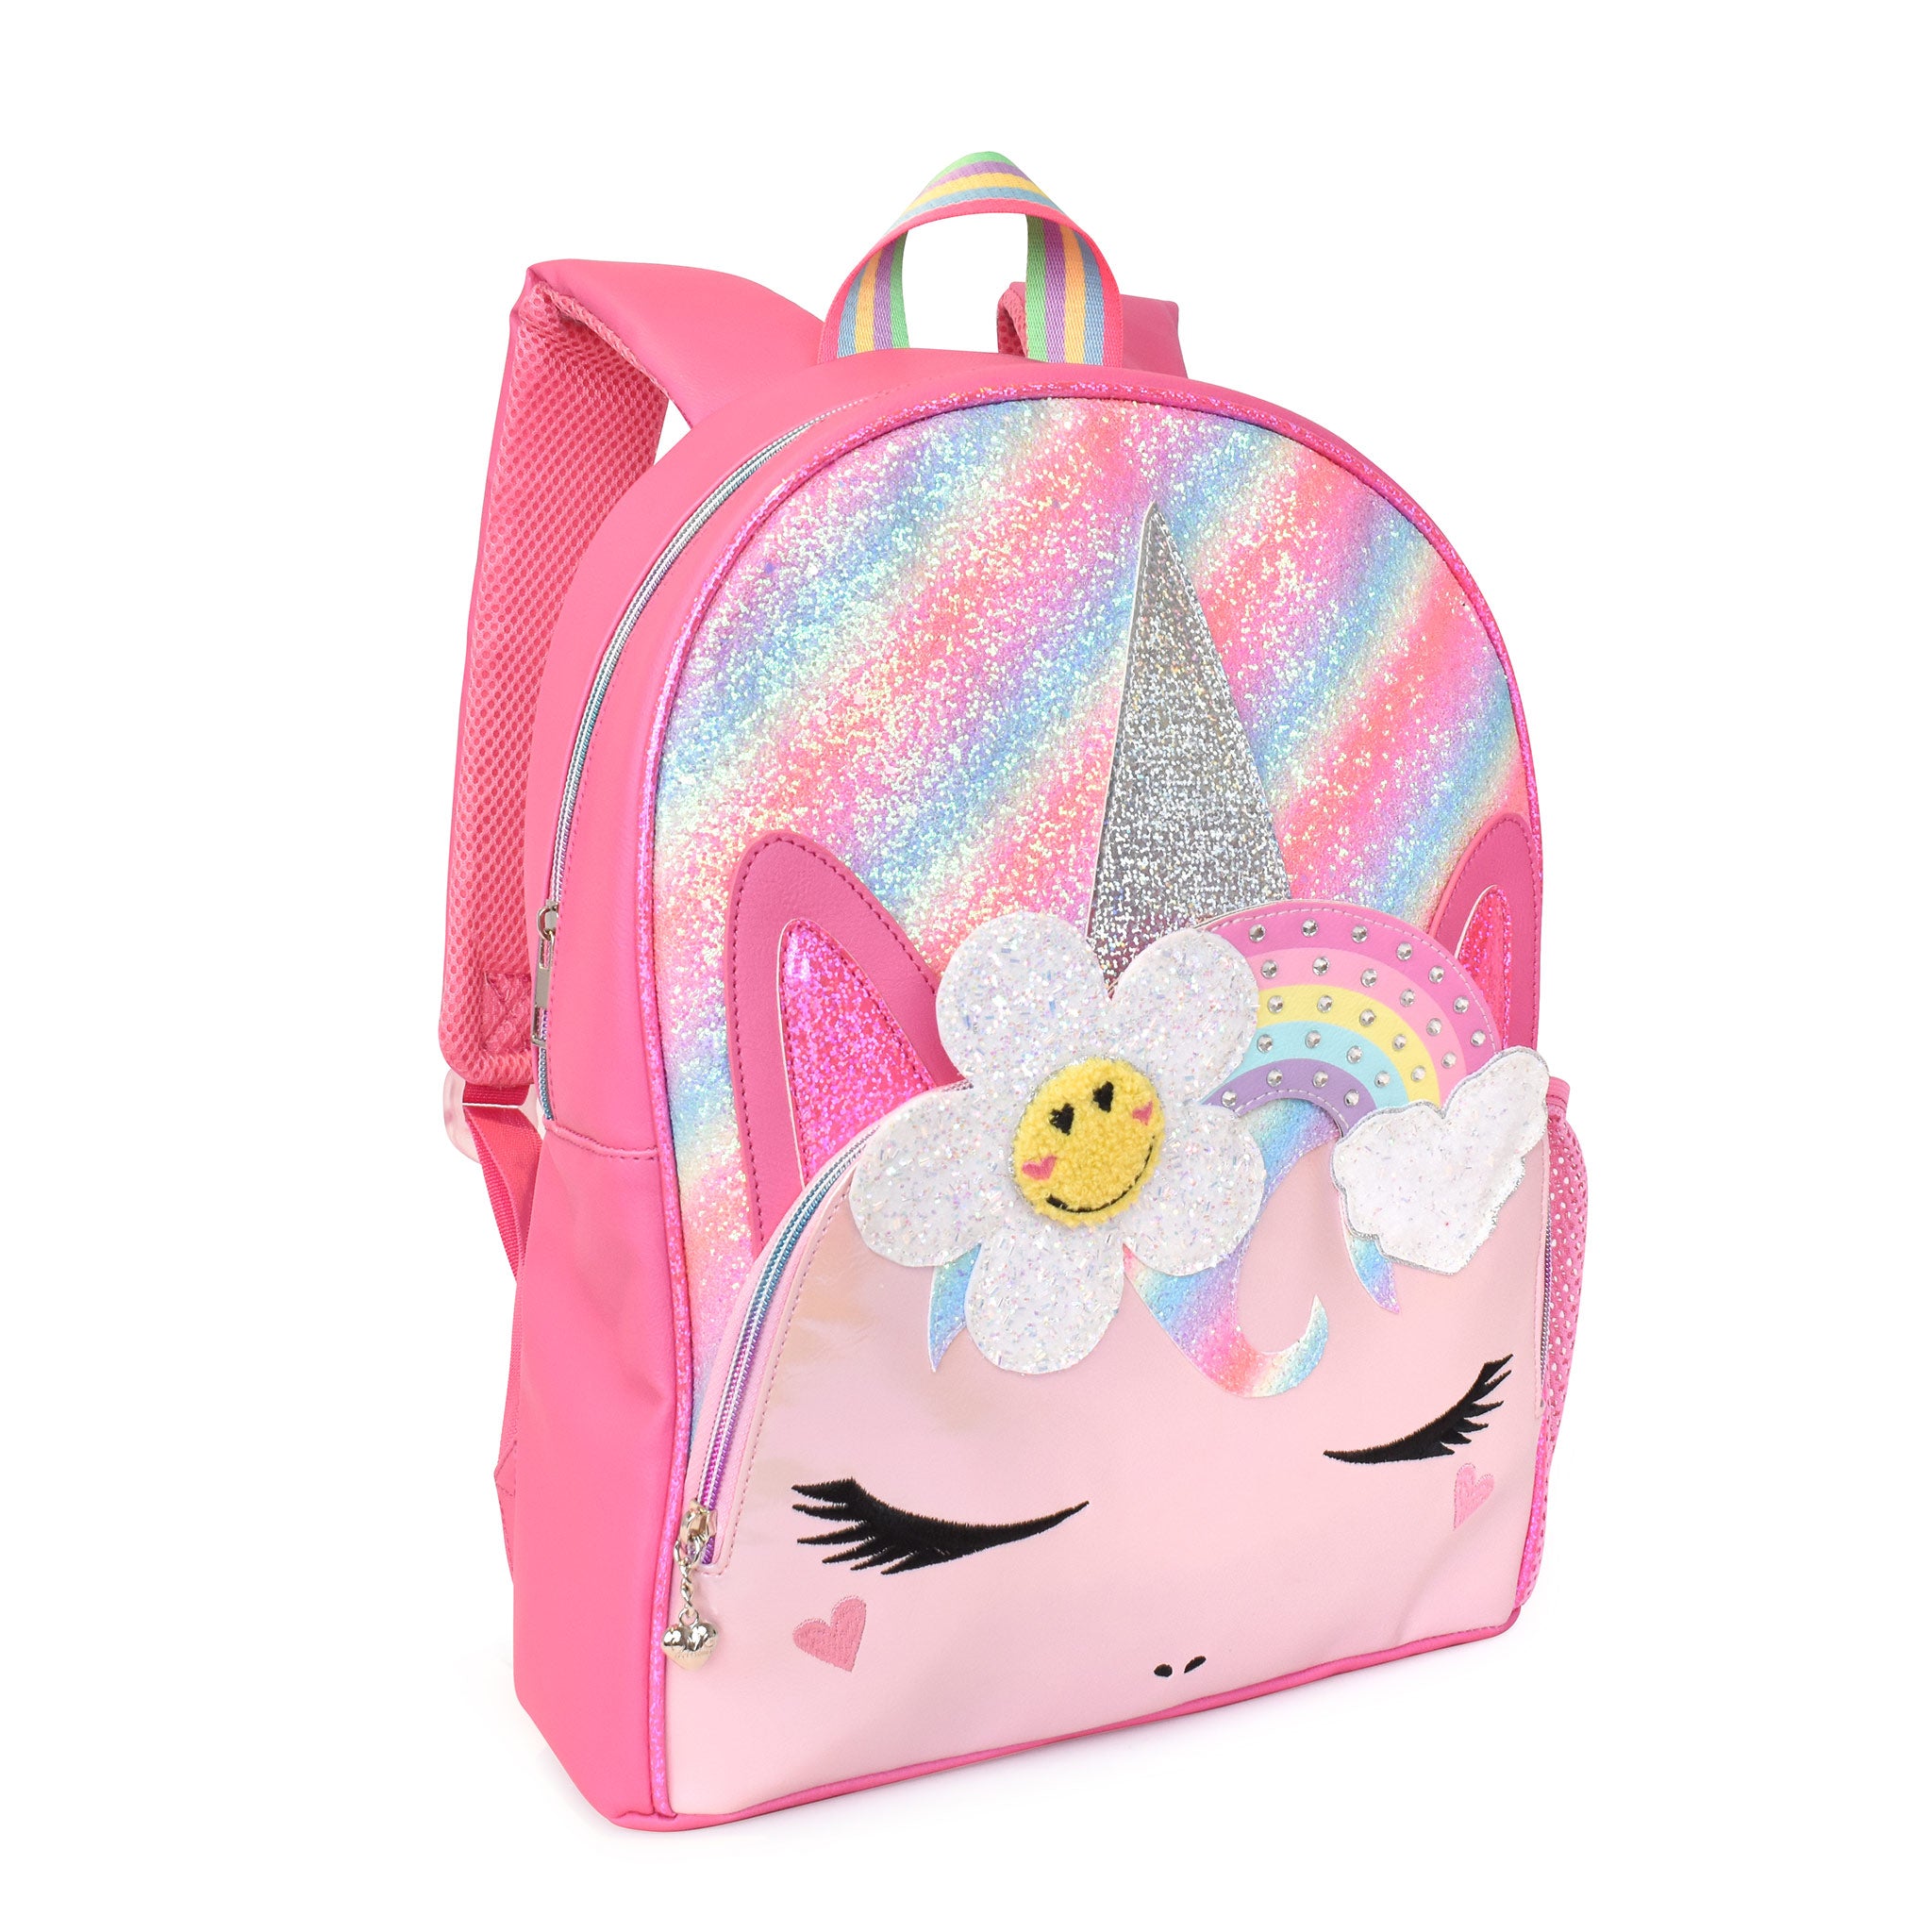 Side view of a unicorn face ombre glitter large backpack with a glitter daisy rainbow applique